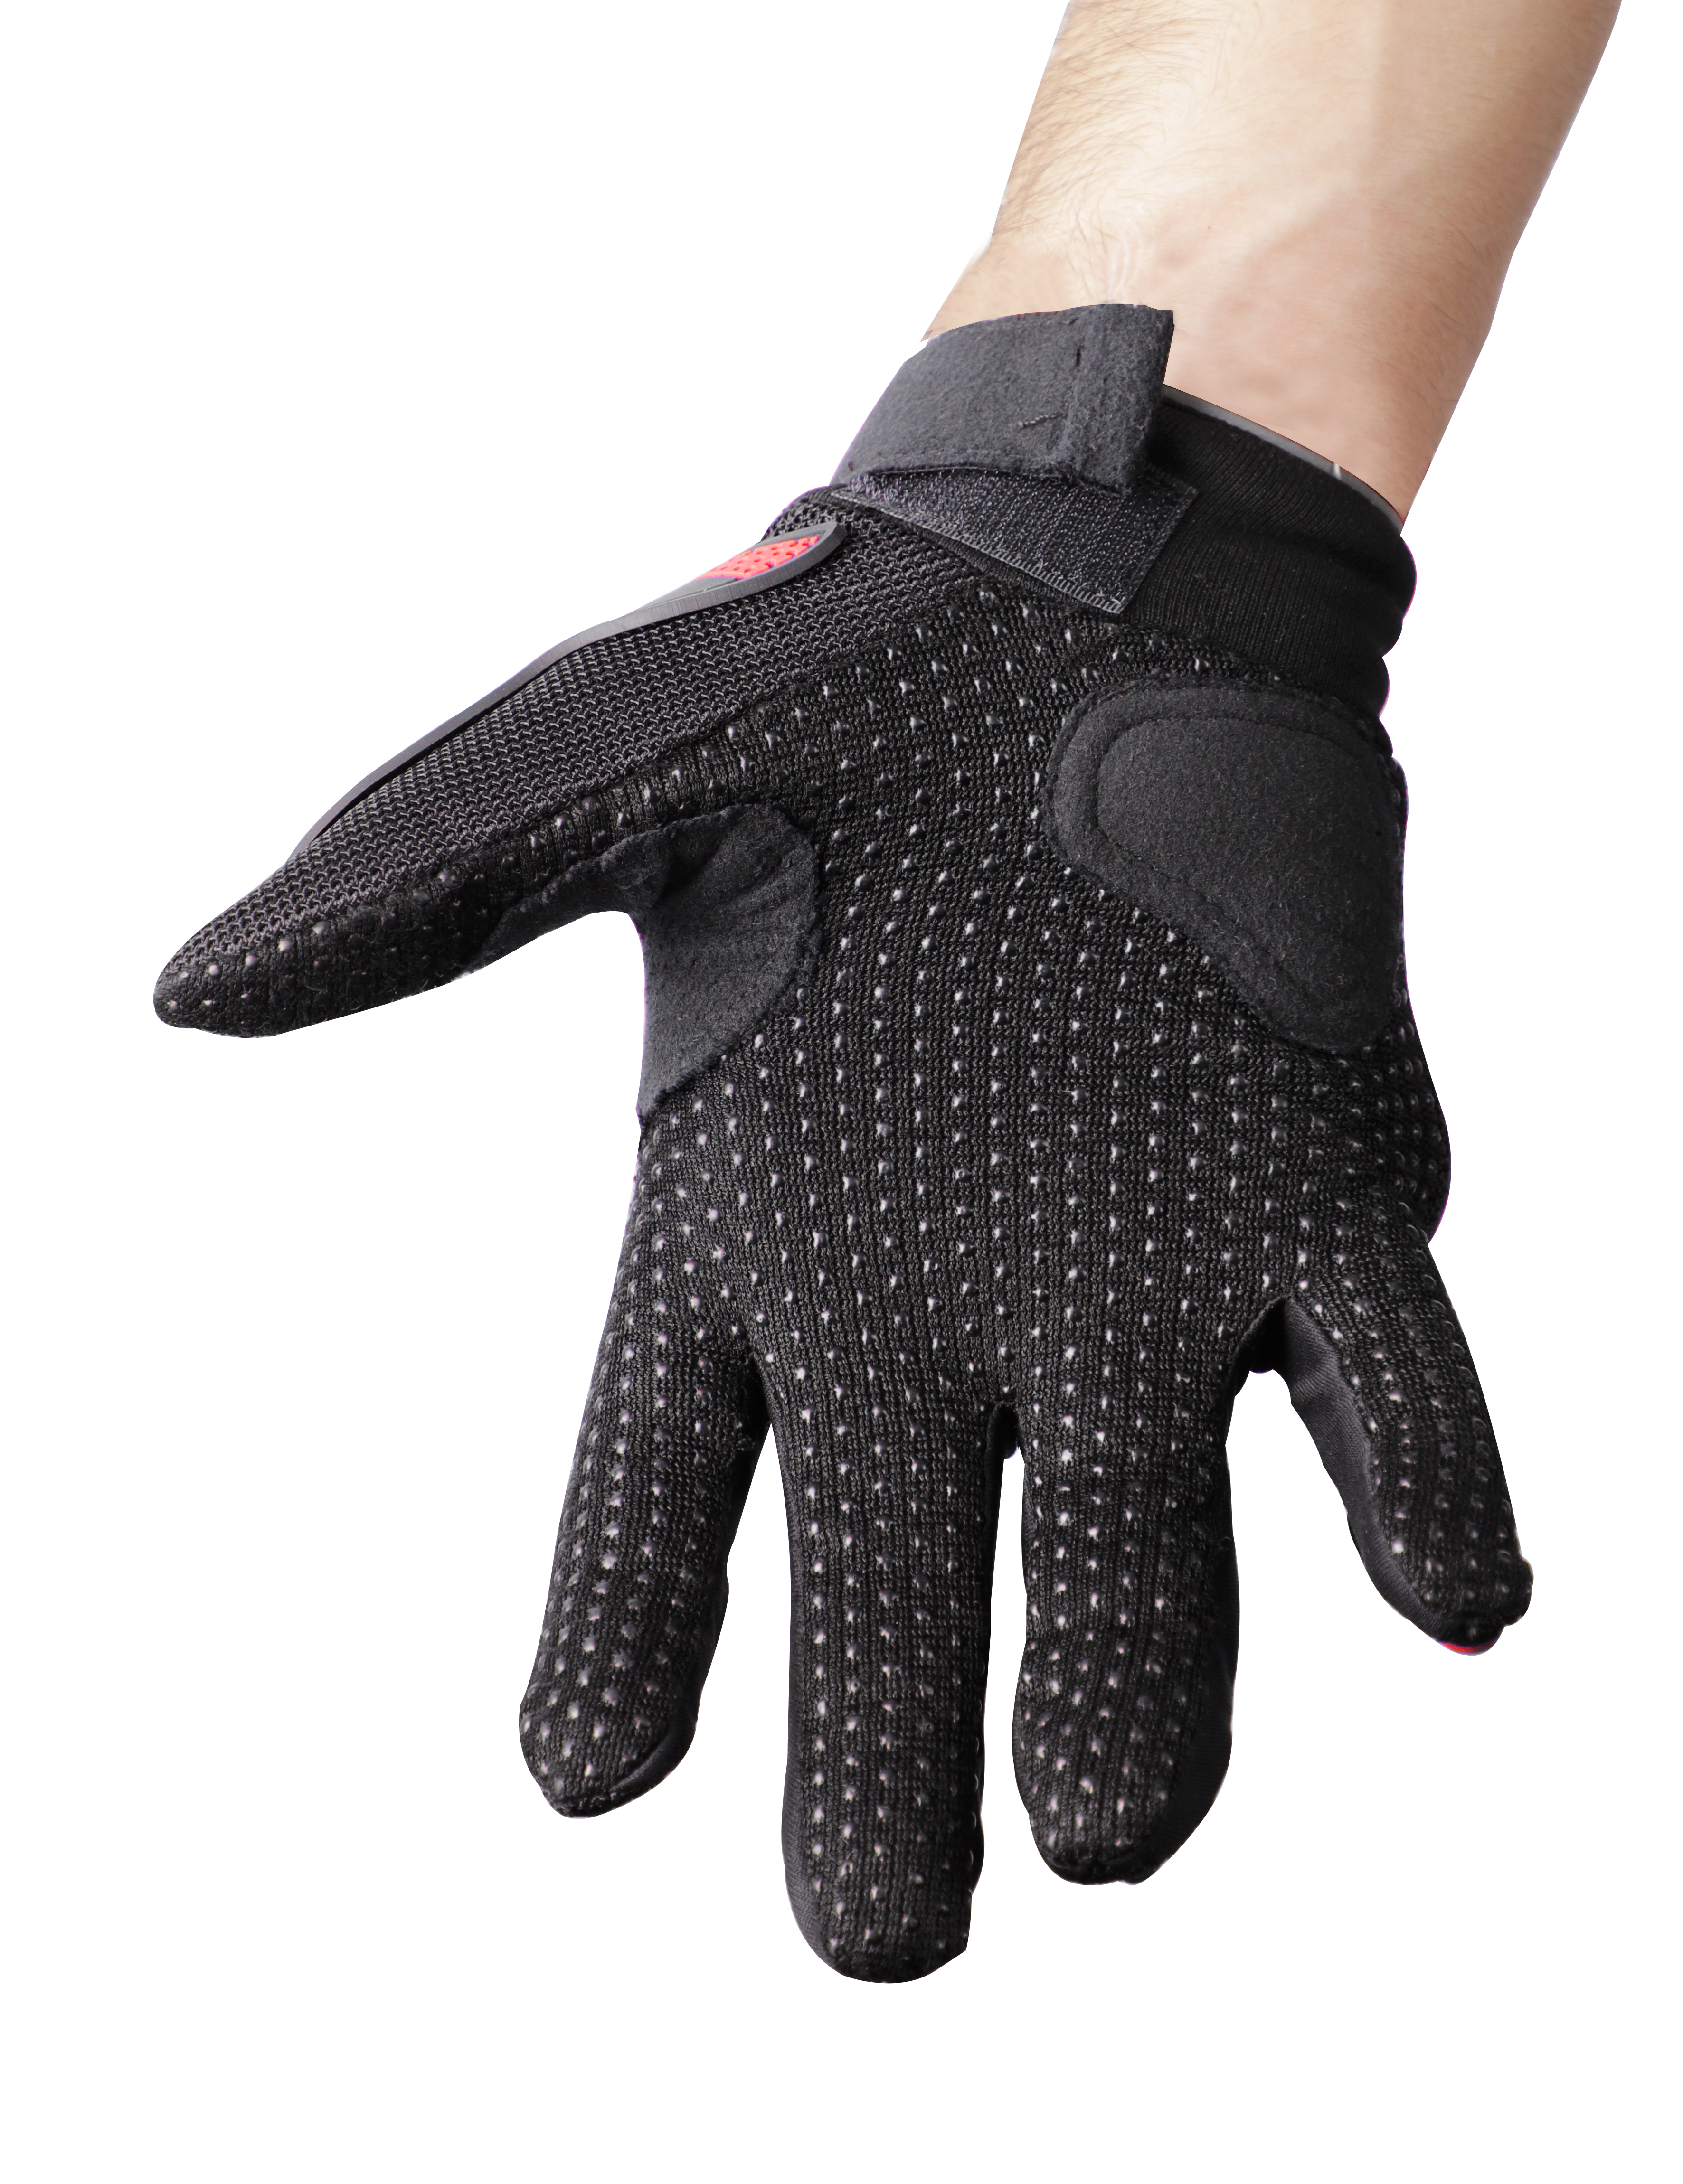 Steelbird Full Finger Bike Riding Gloves With Touch Screen Sensitivity At Thumb And Index Finger, Protective Off-Road Motorbike Racing (Red)